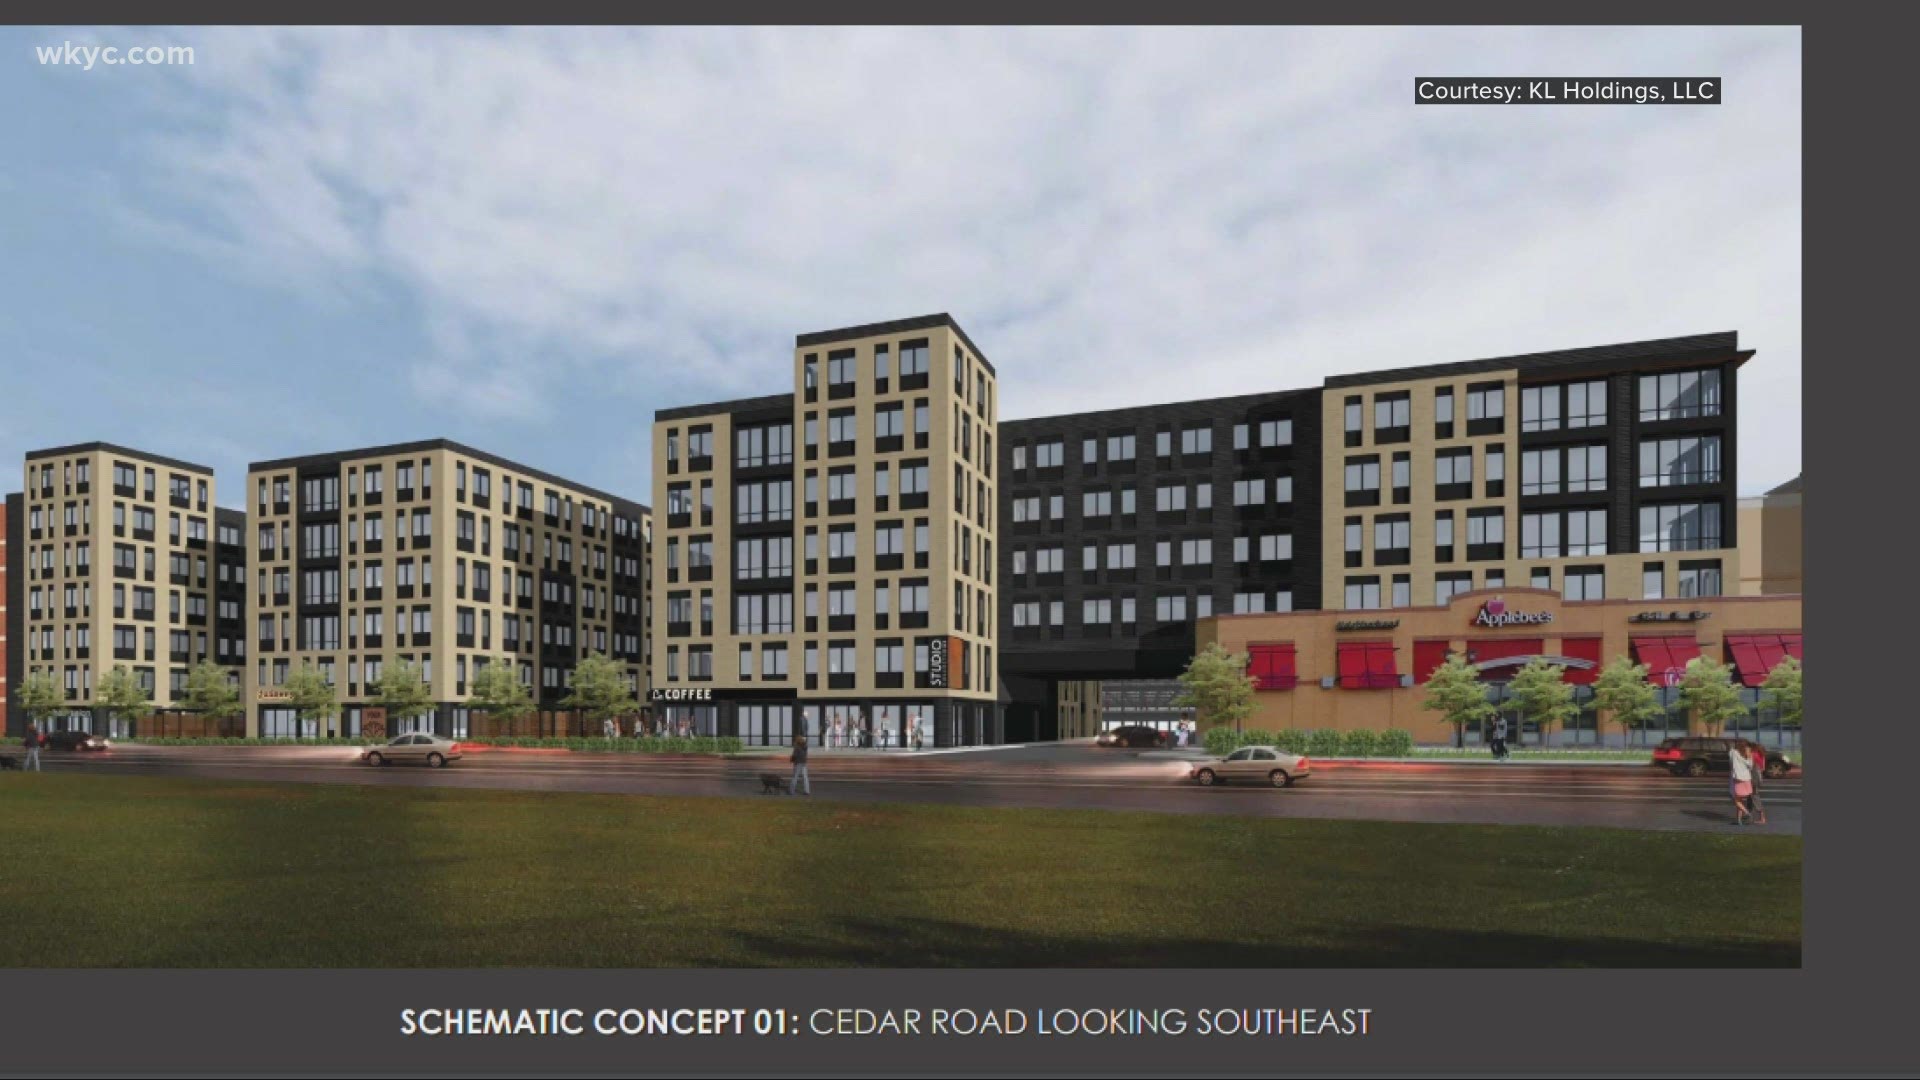 The University Heights city council approved moving forward with plans to redevelop the shopping center on Cedar Road. Visit wkyc.com for more details.